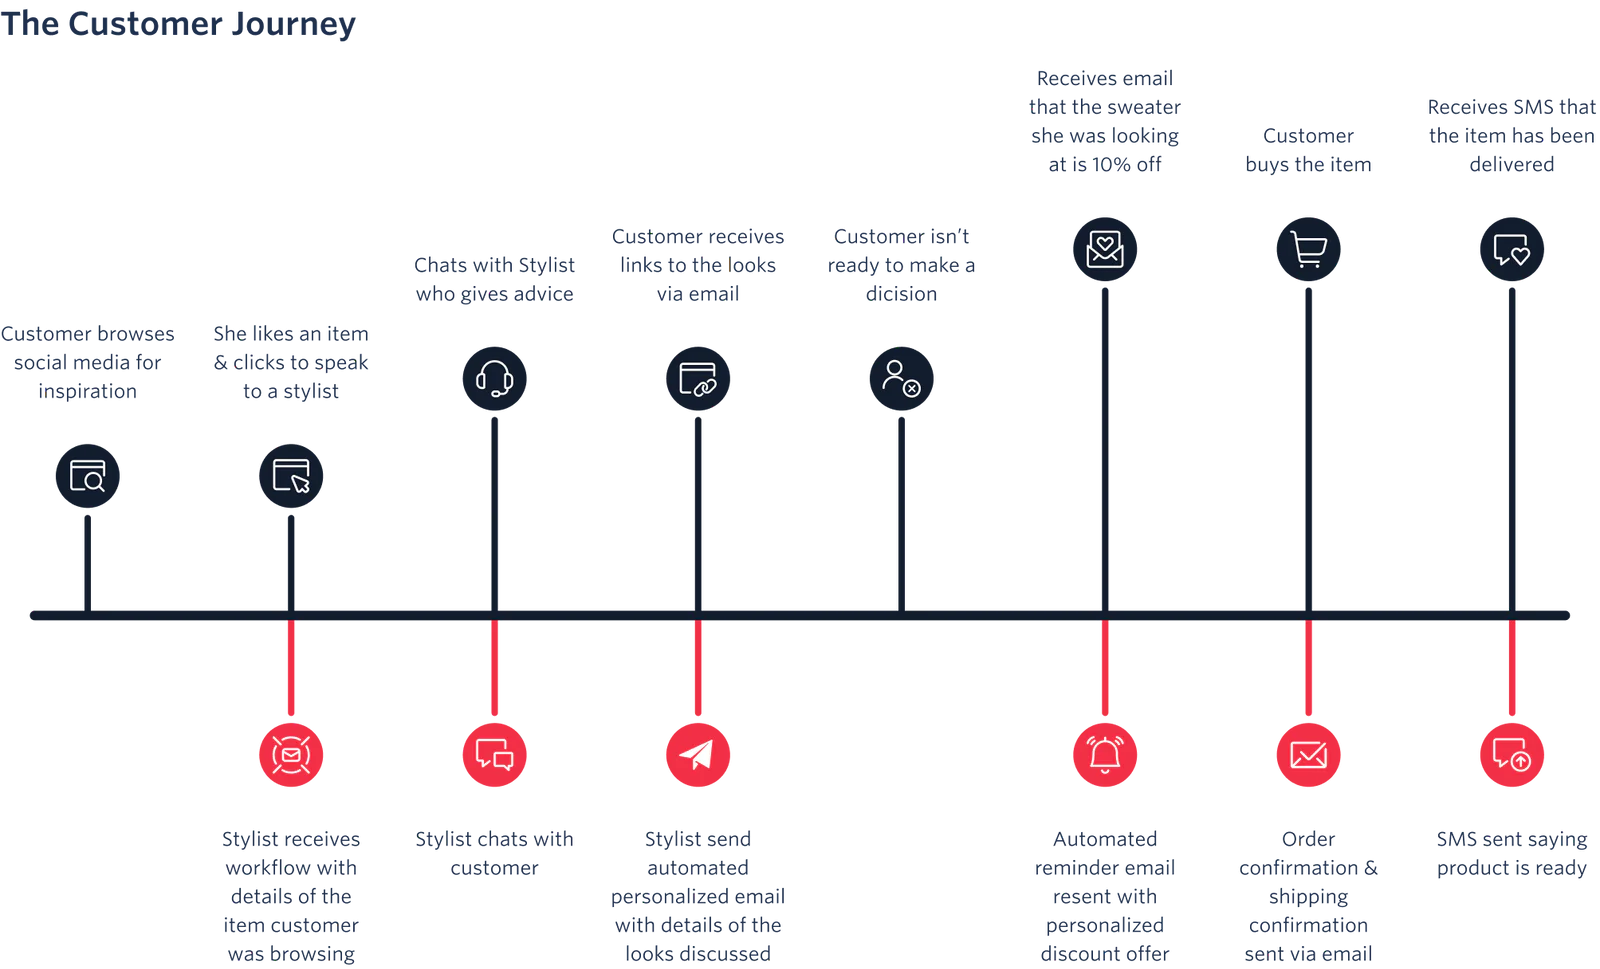 The complete customer journey example timeline on how he purchases and receives a product.